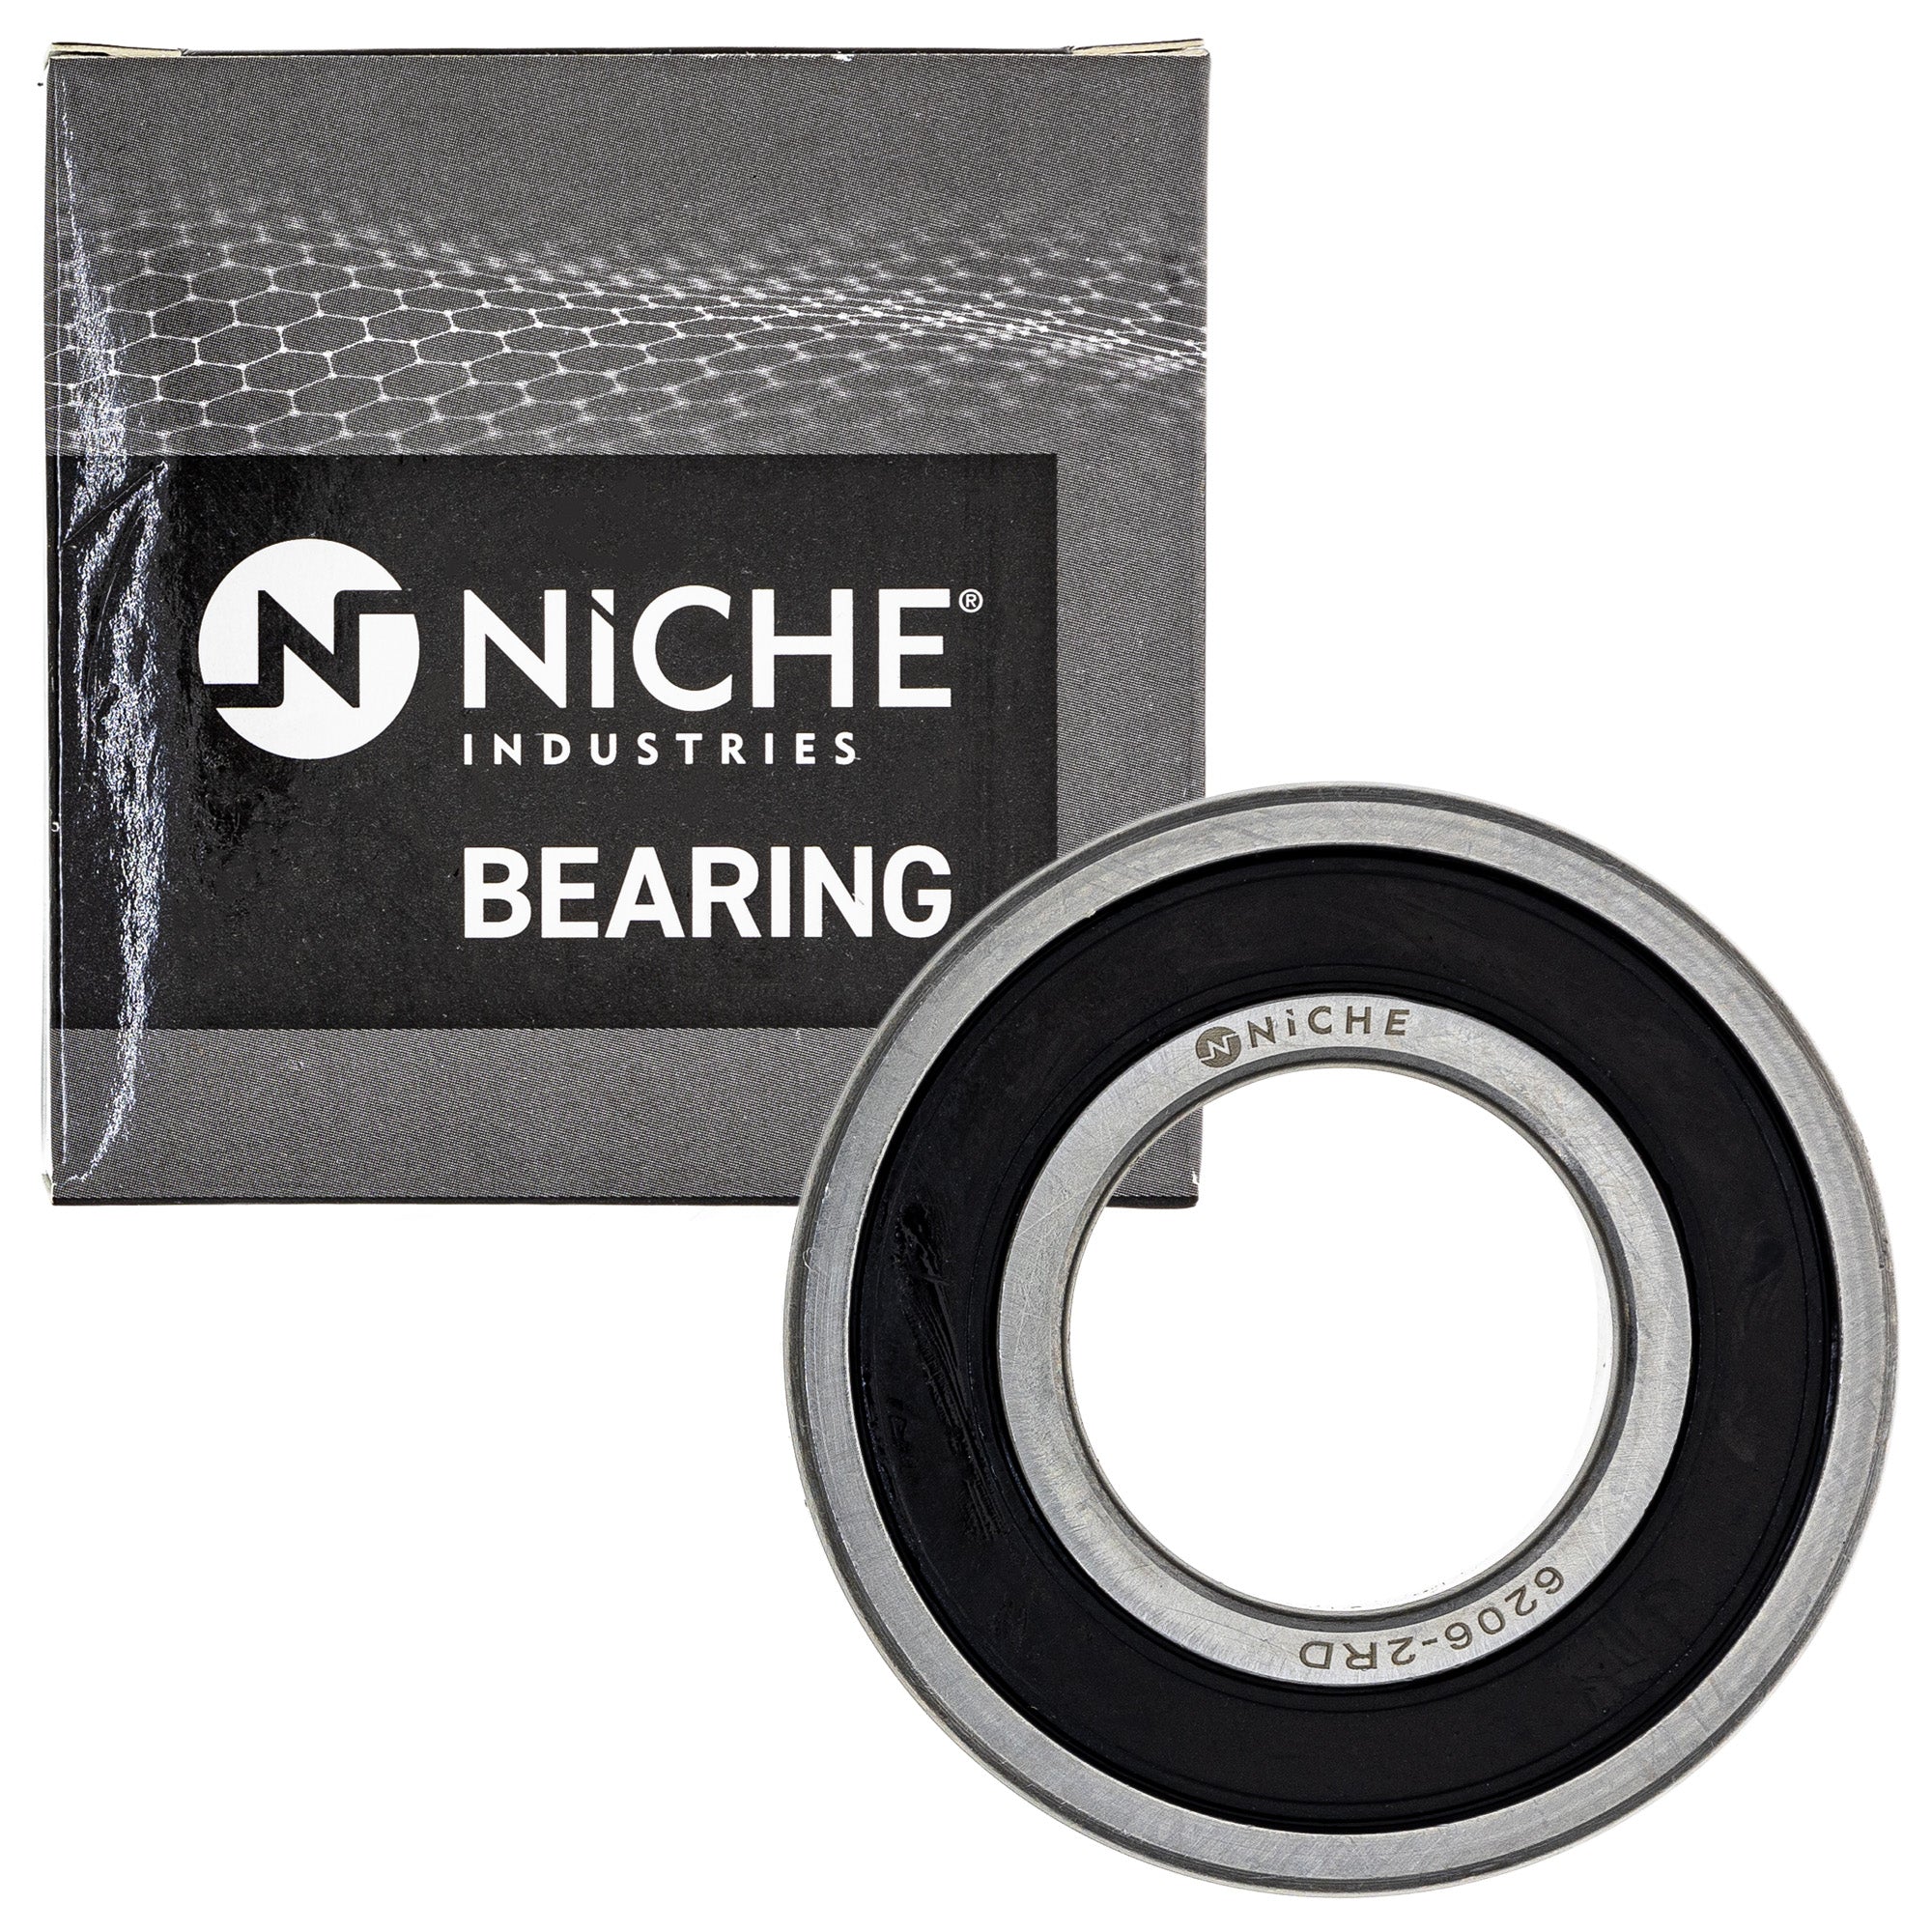 NICHE MK1009185 Wheel Bearing Seal Kit for zOTHER Traxter Quest